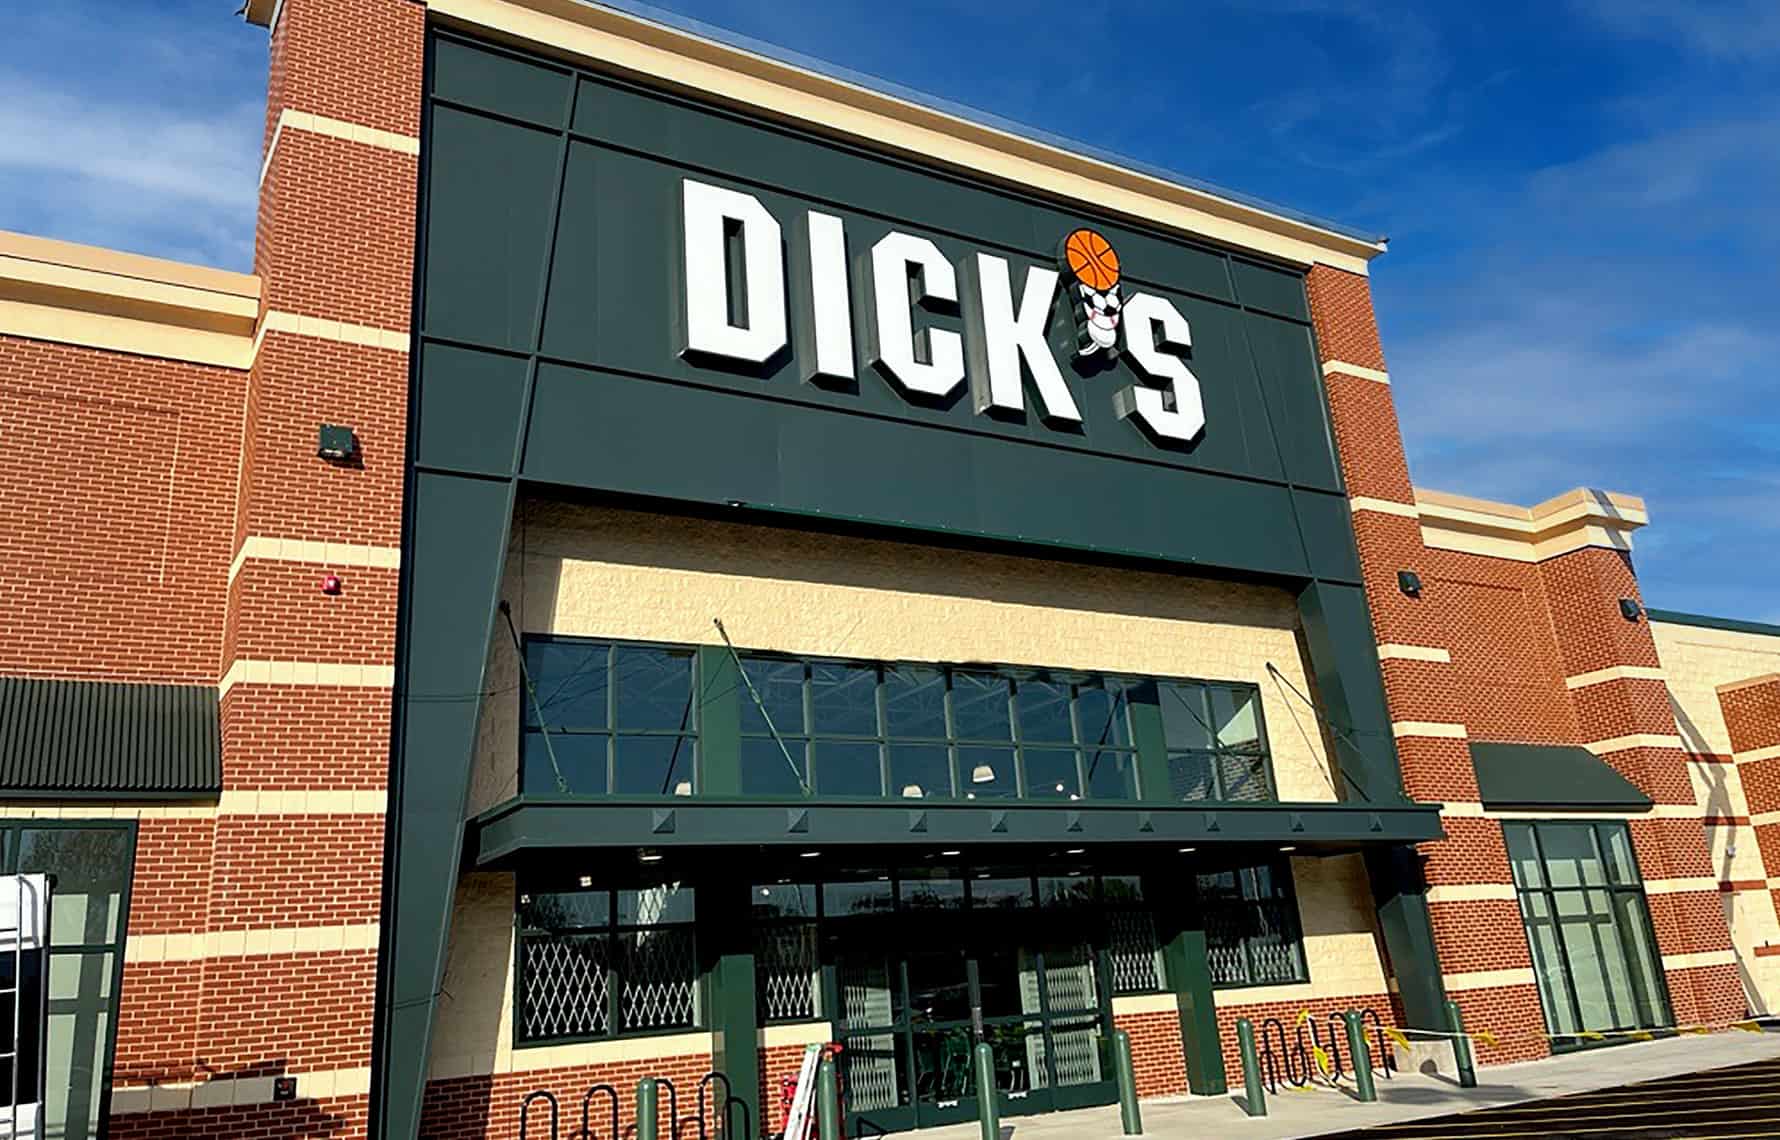 Dick's sporting goods fascia in an open air mall showing awnings, signage and doors and windows